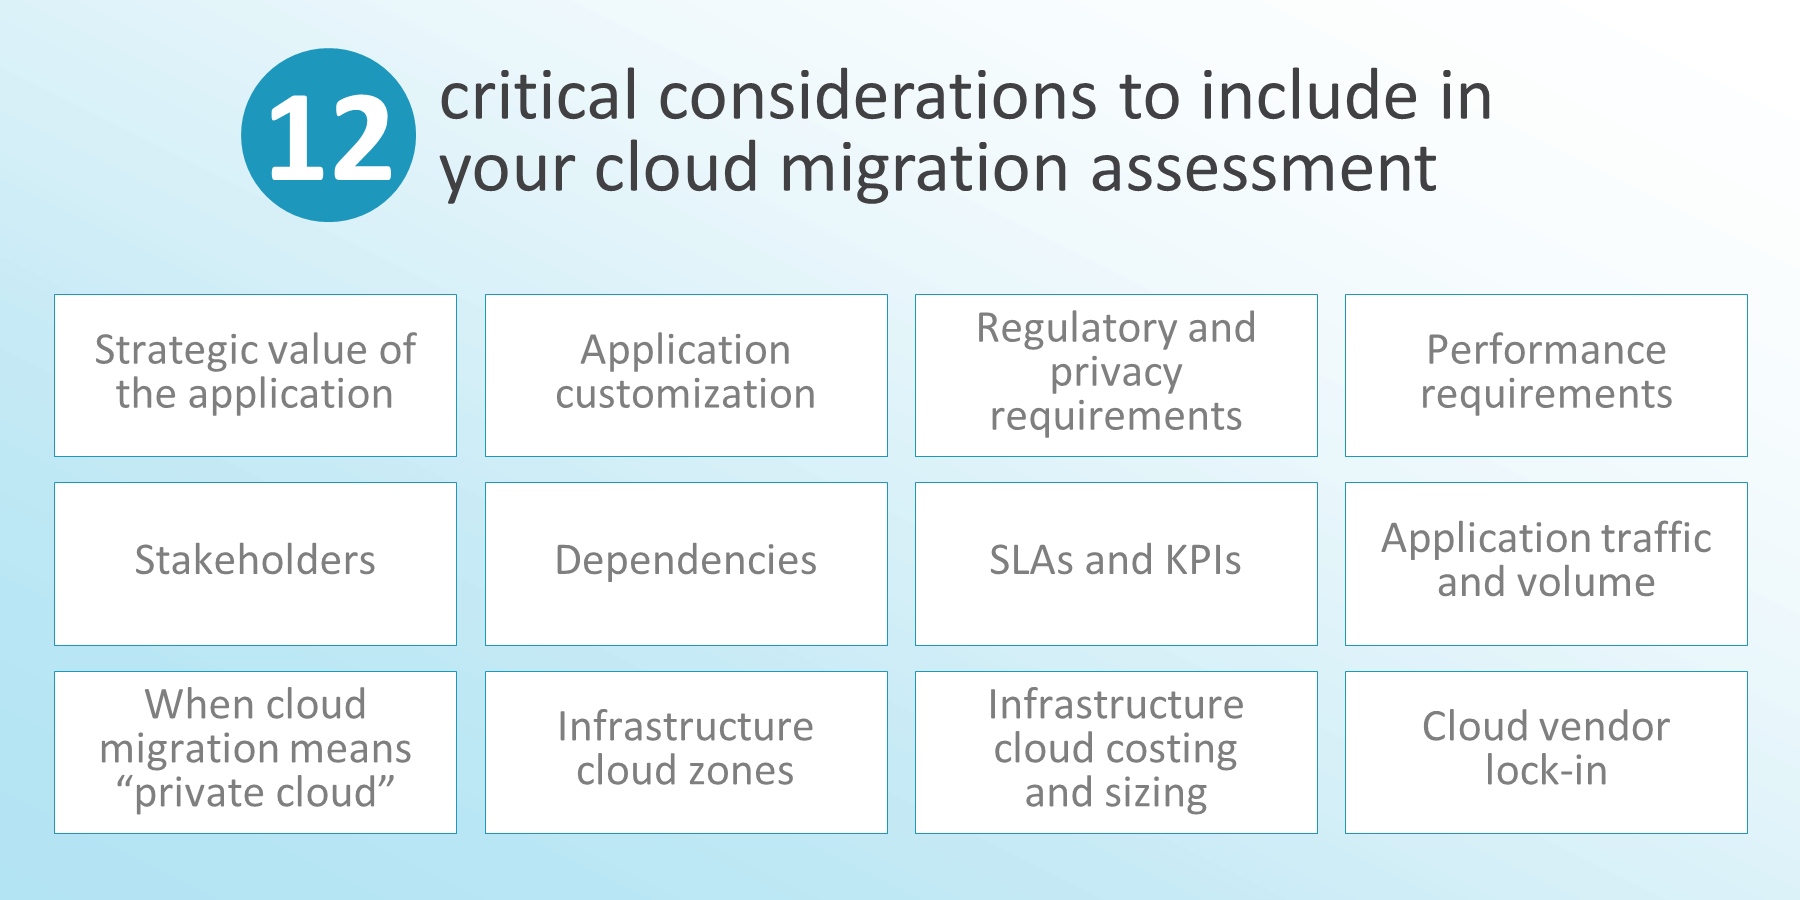 12 critical considerations to include in your cloud migration assessment